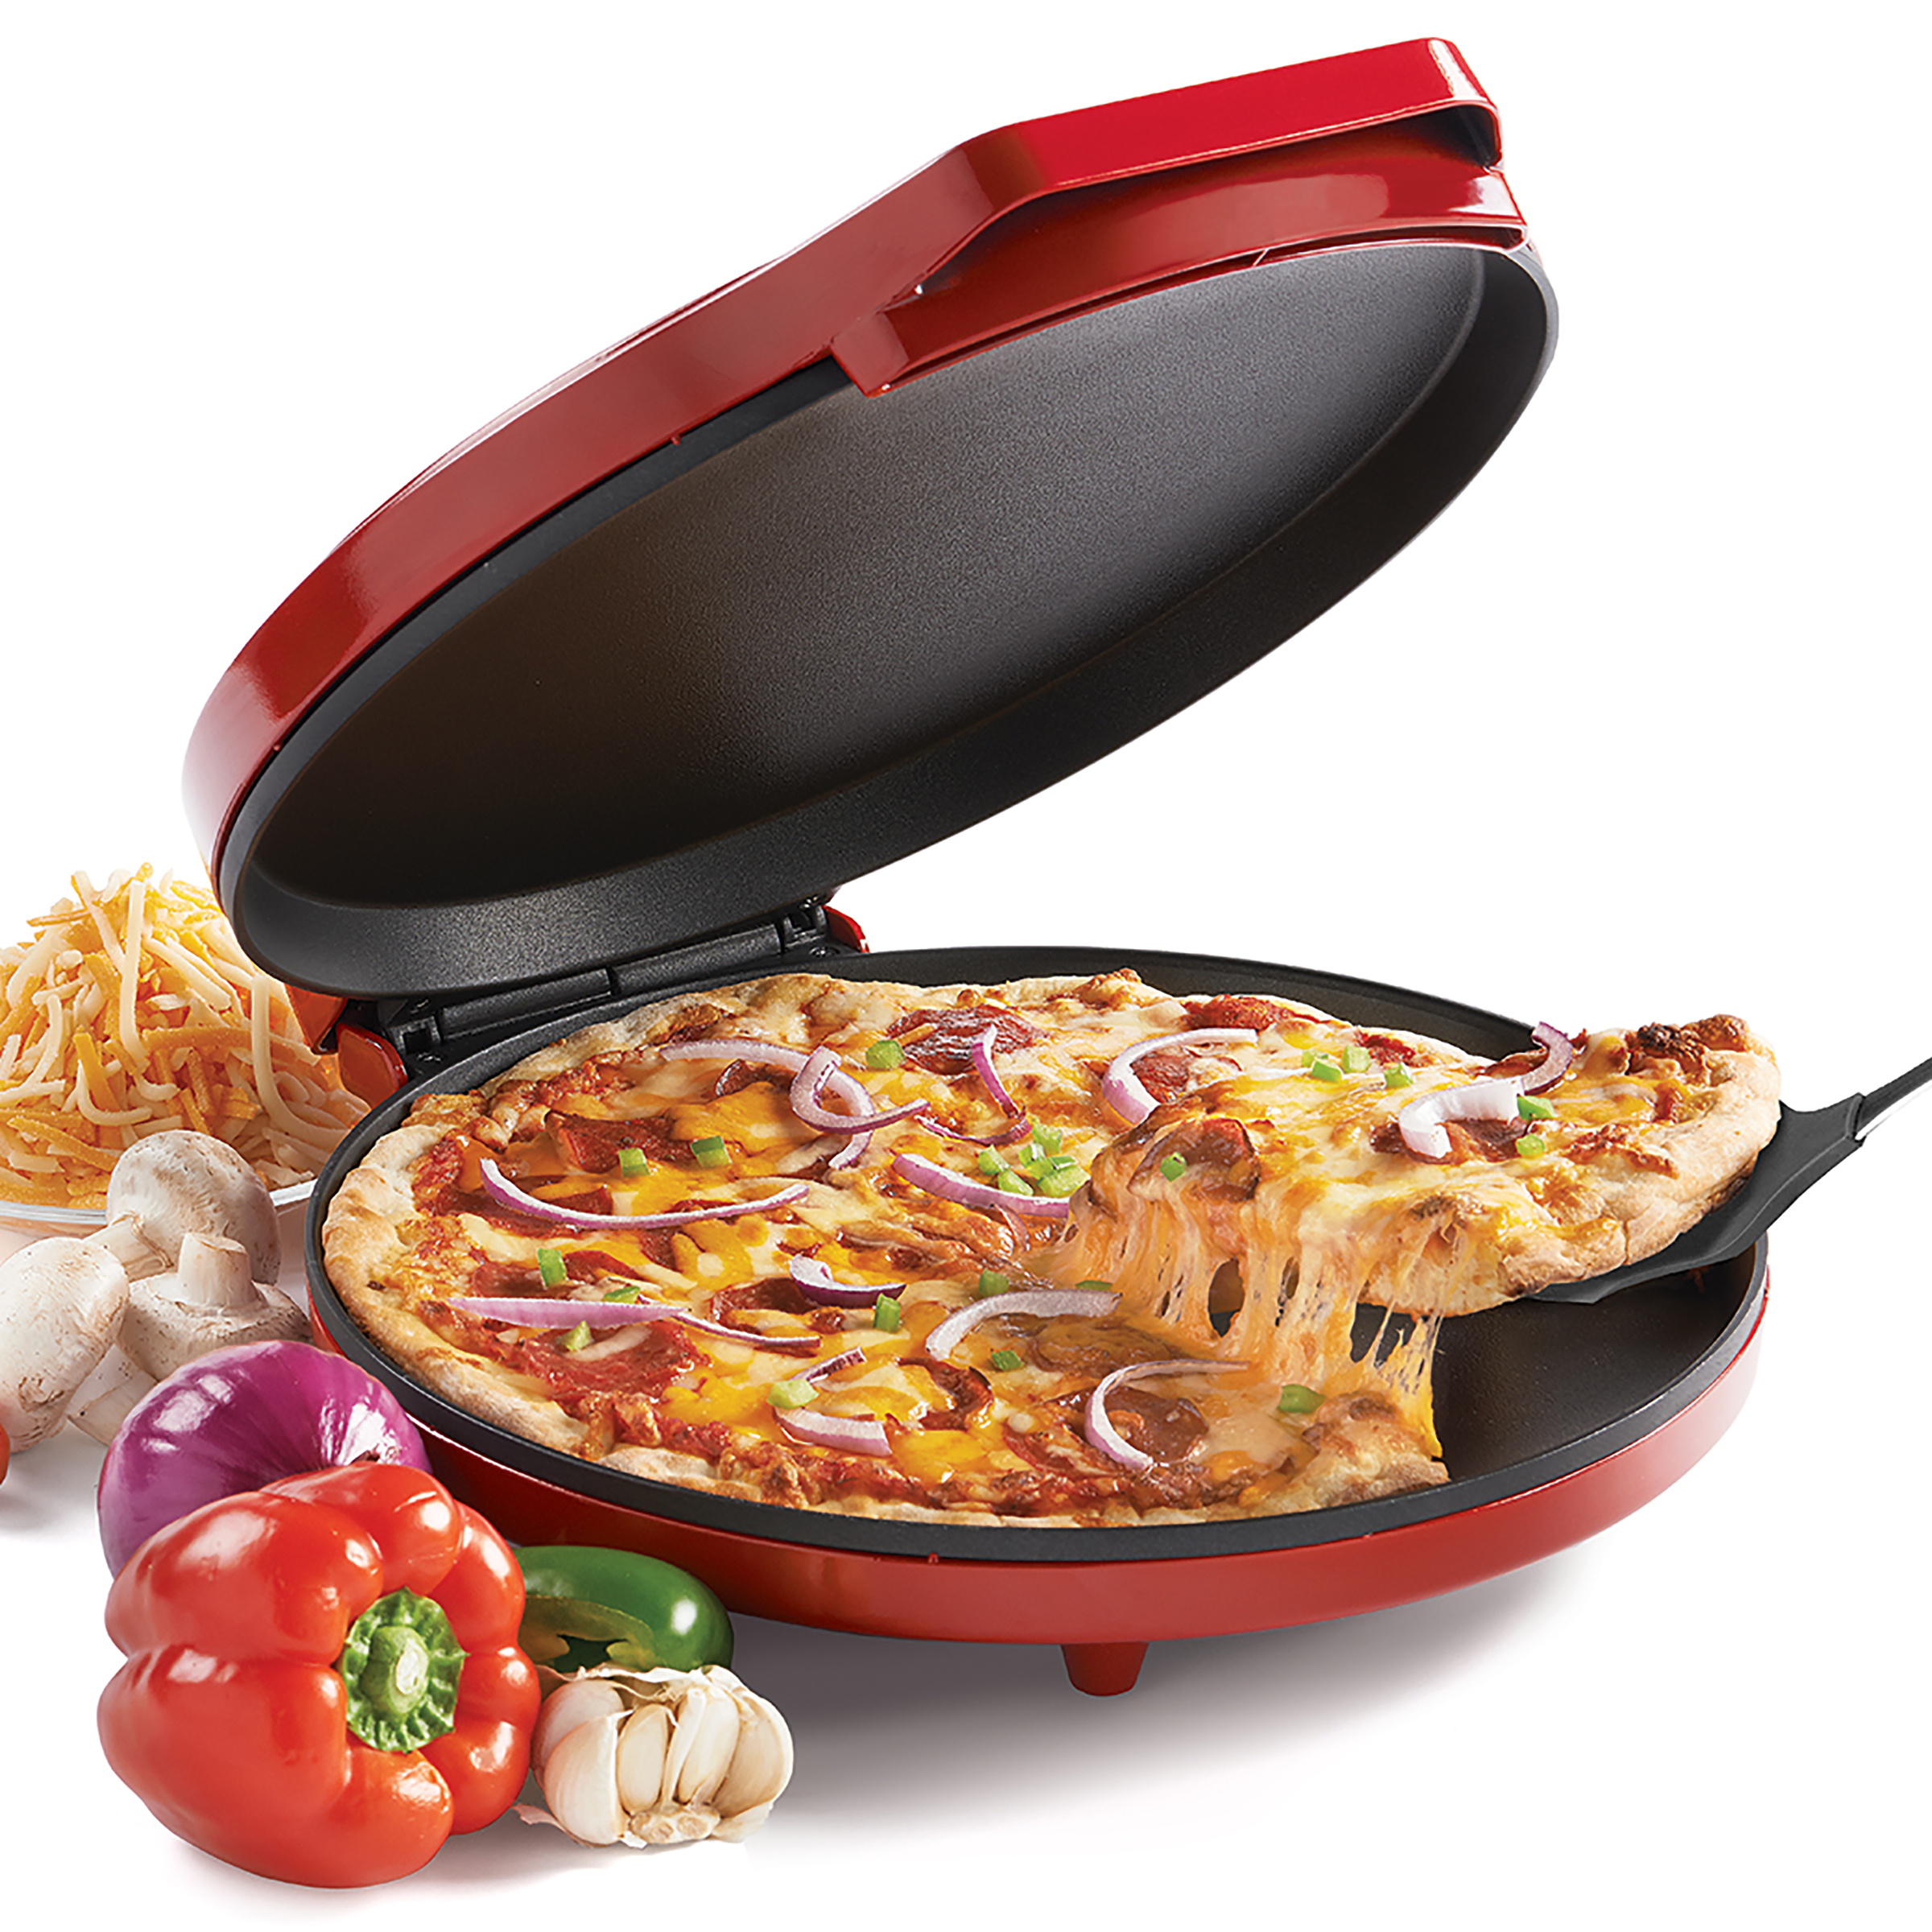 Betty Crocker Pizza Maker Plus, 12" Indoor Electric Grill, Nonstick Griddle Pan for Pizzas, Quesadillas, Tortillas, Nachos and more, 12" Electric Griddle for Delicious Meals and Snacks, Red - image 1 of 5